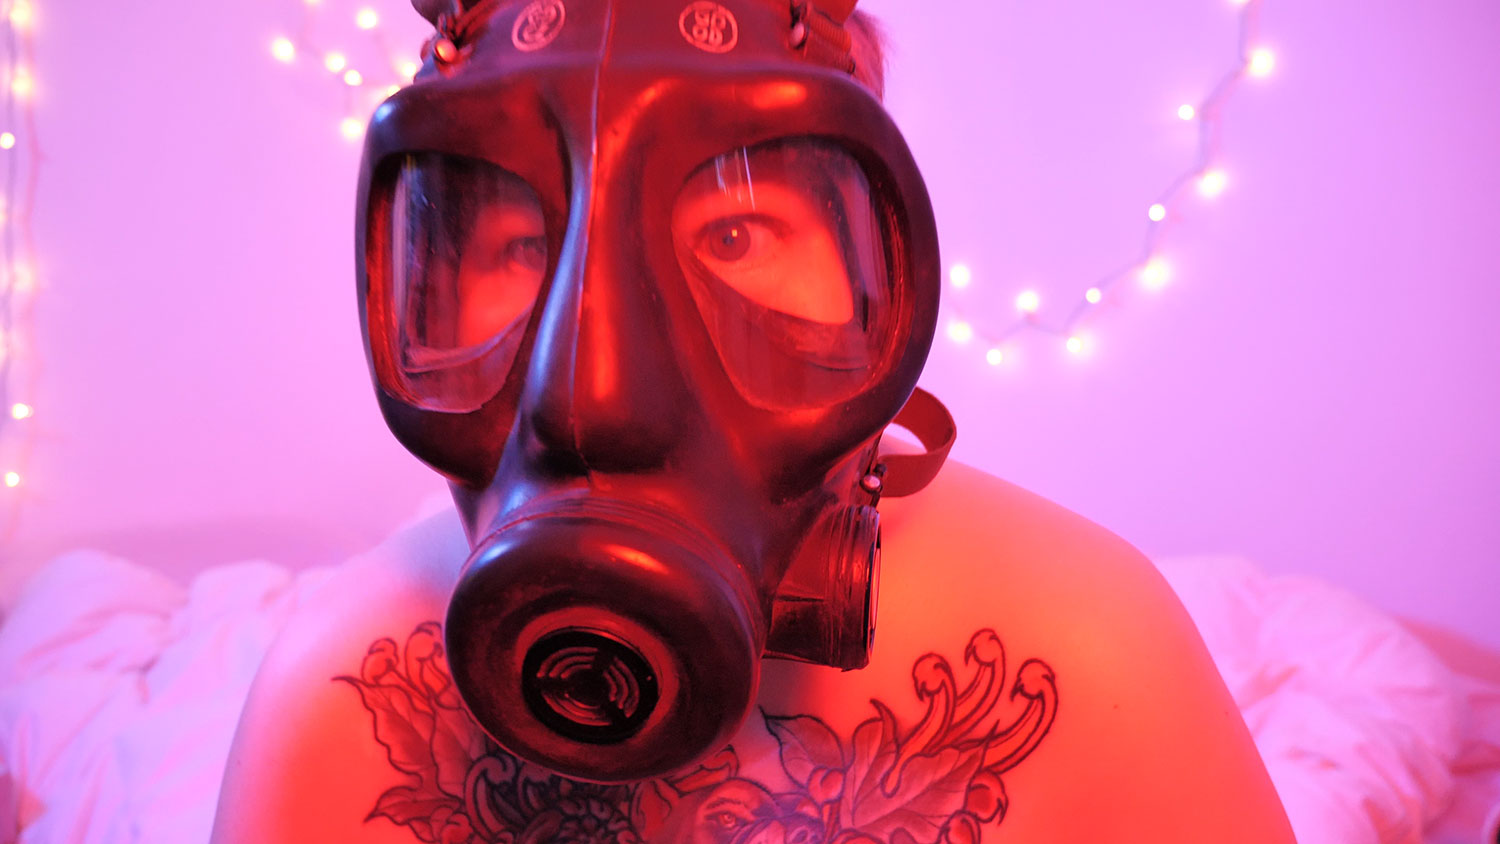 a shirtless tattooed person in a gas mask